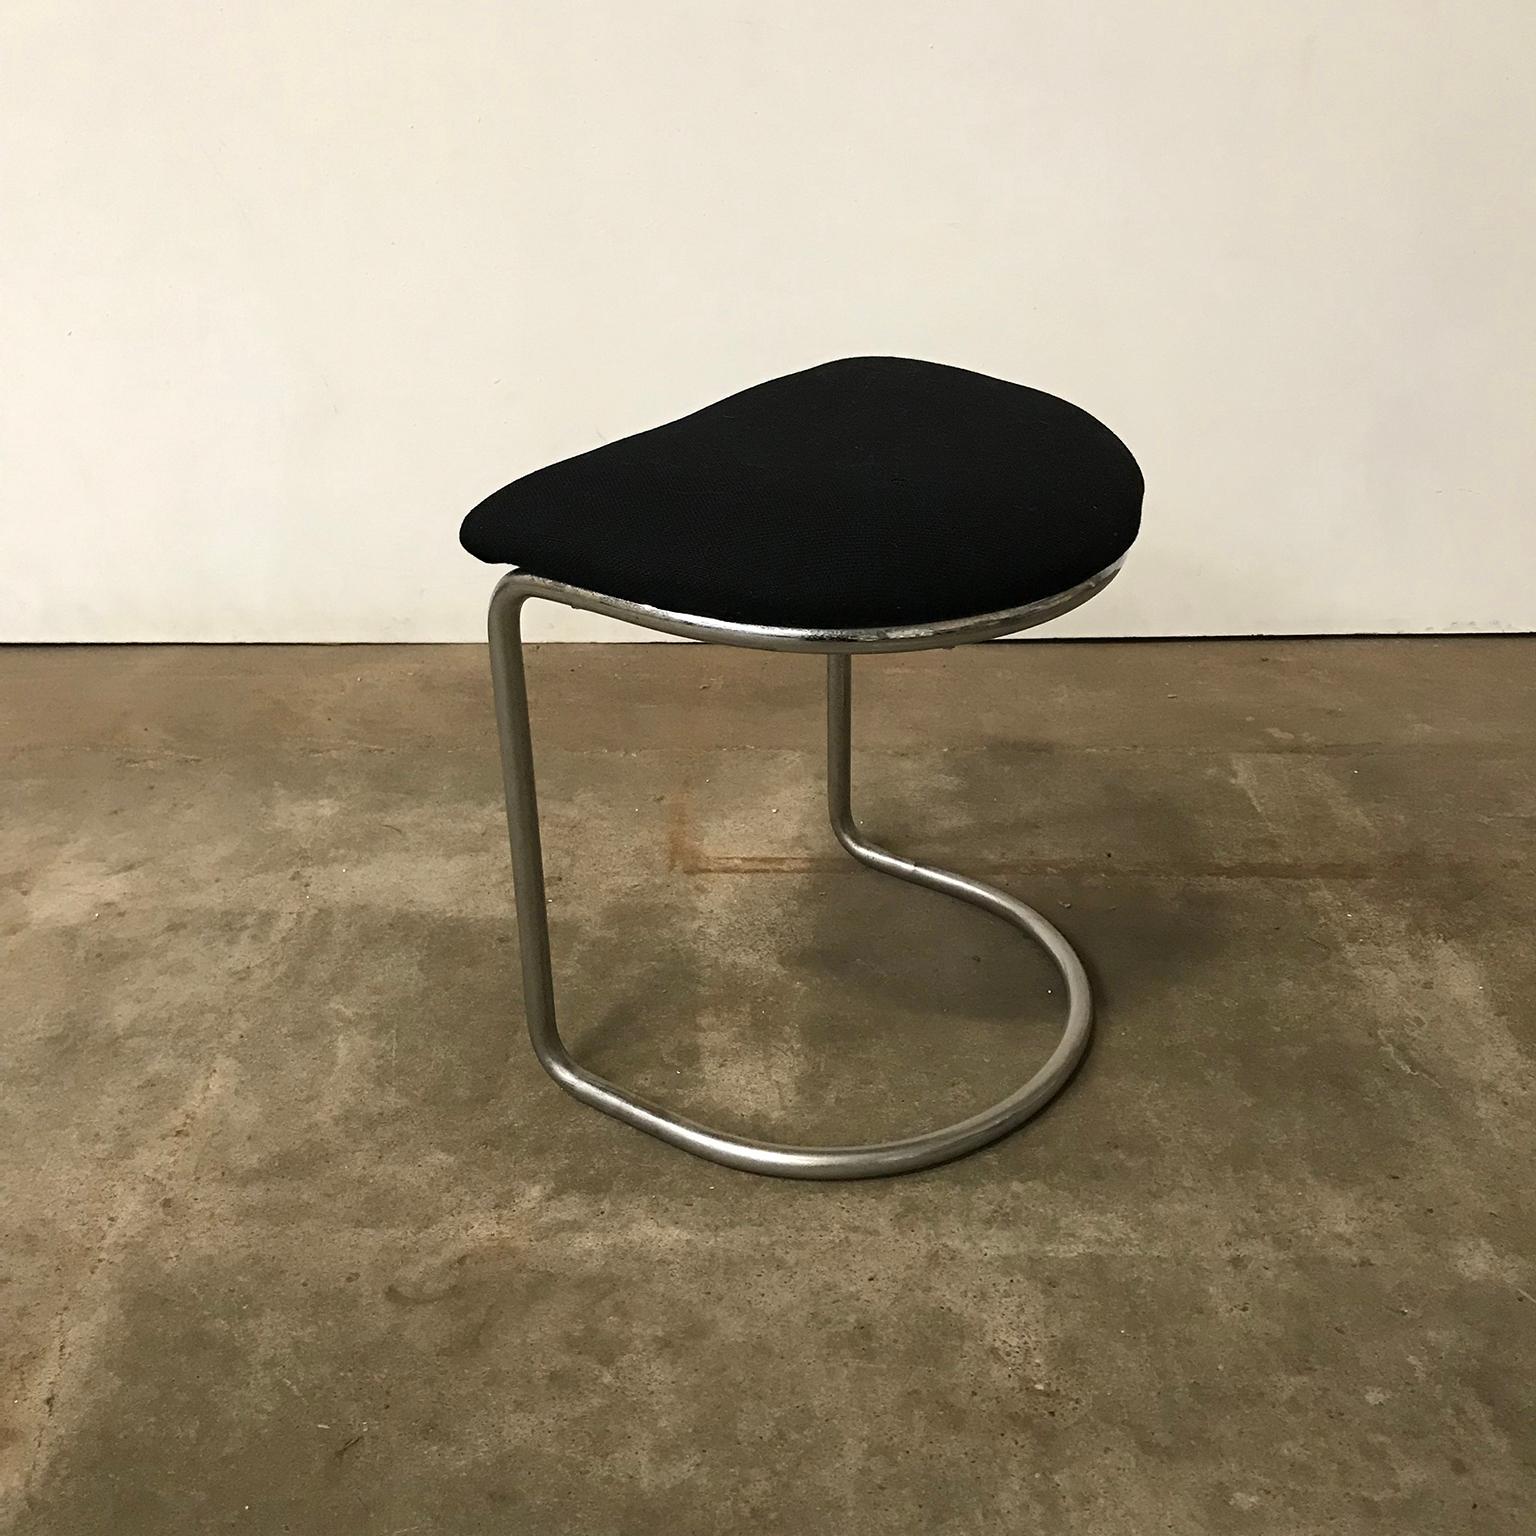 W.H. Gispen for Gispen, for Make Up Tabouret in Chrome and Black, circa 1930 In Good Condition For Sale In Amsterdam IJMuiden, NL